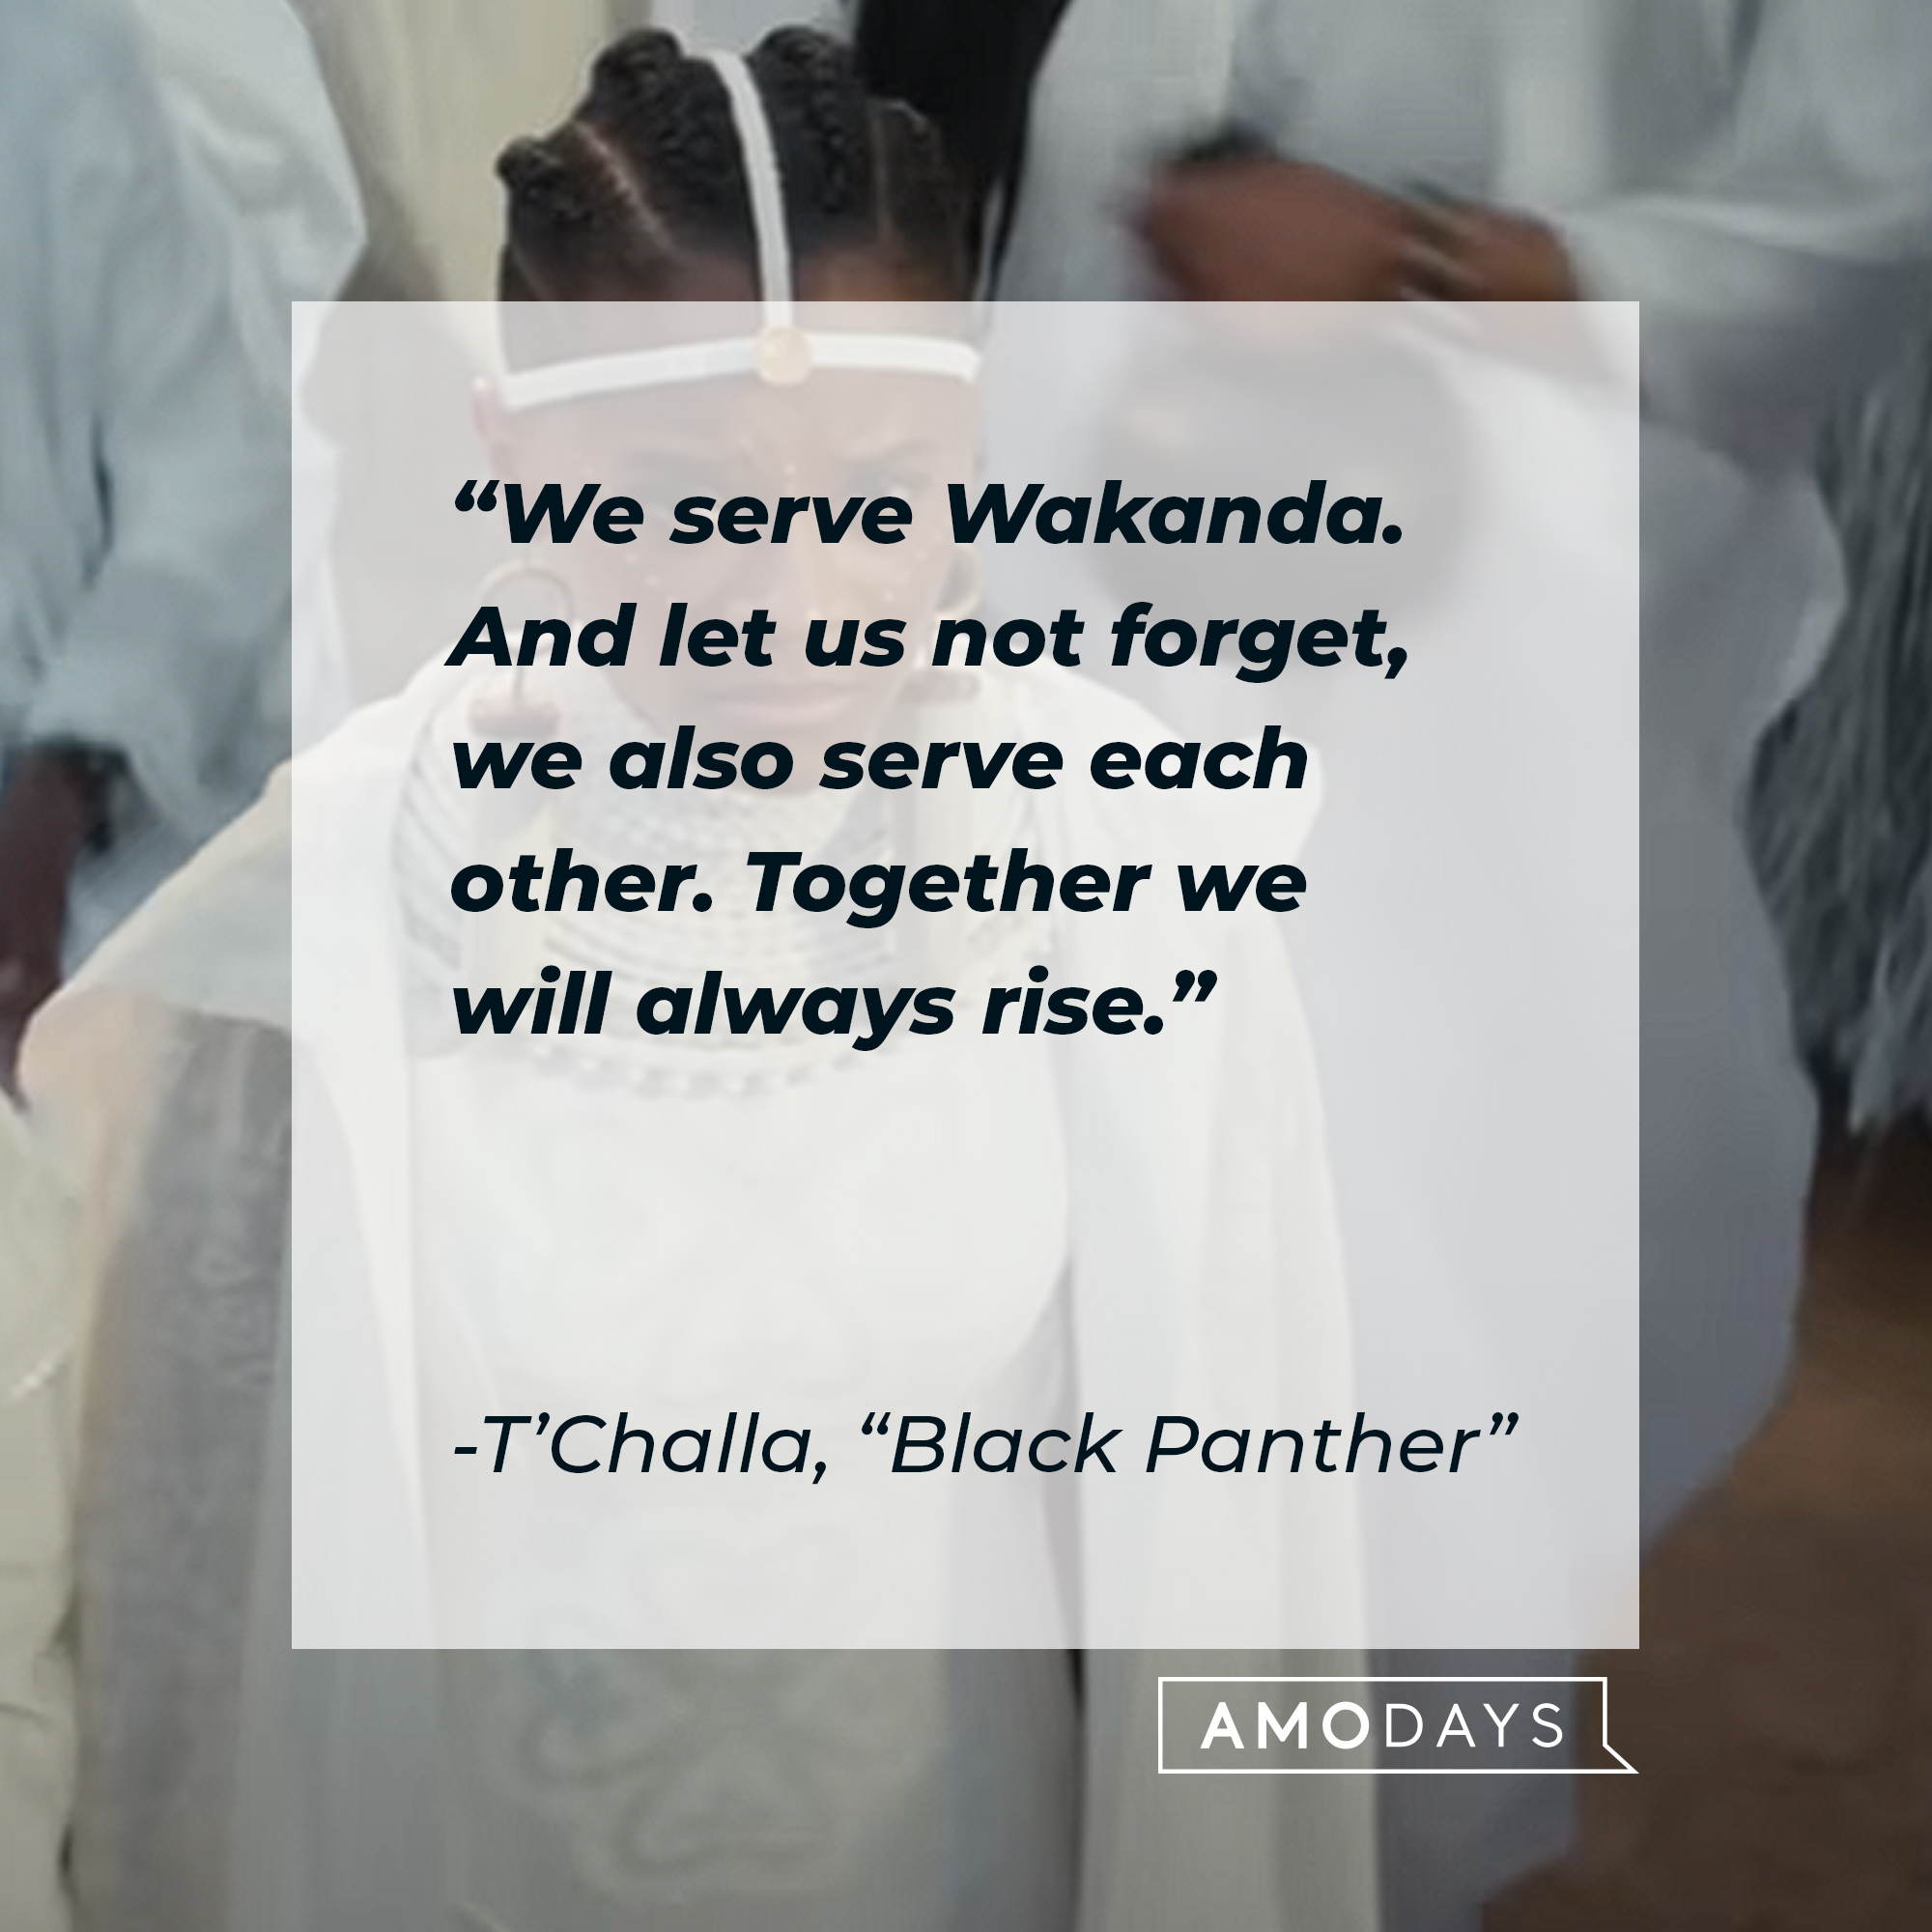 Shuri's quote from "Wakanda Forever:" “We serve Wakanda. And let us not forget, we also serve each other. Together we will always rise.”  | Source: Youtube.com/marvel